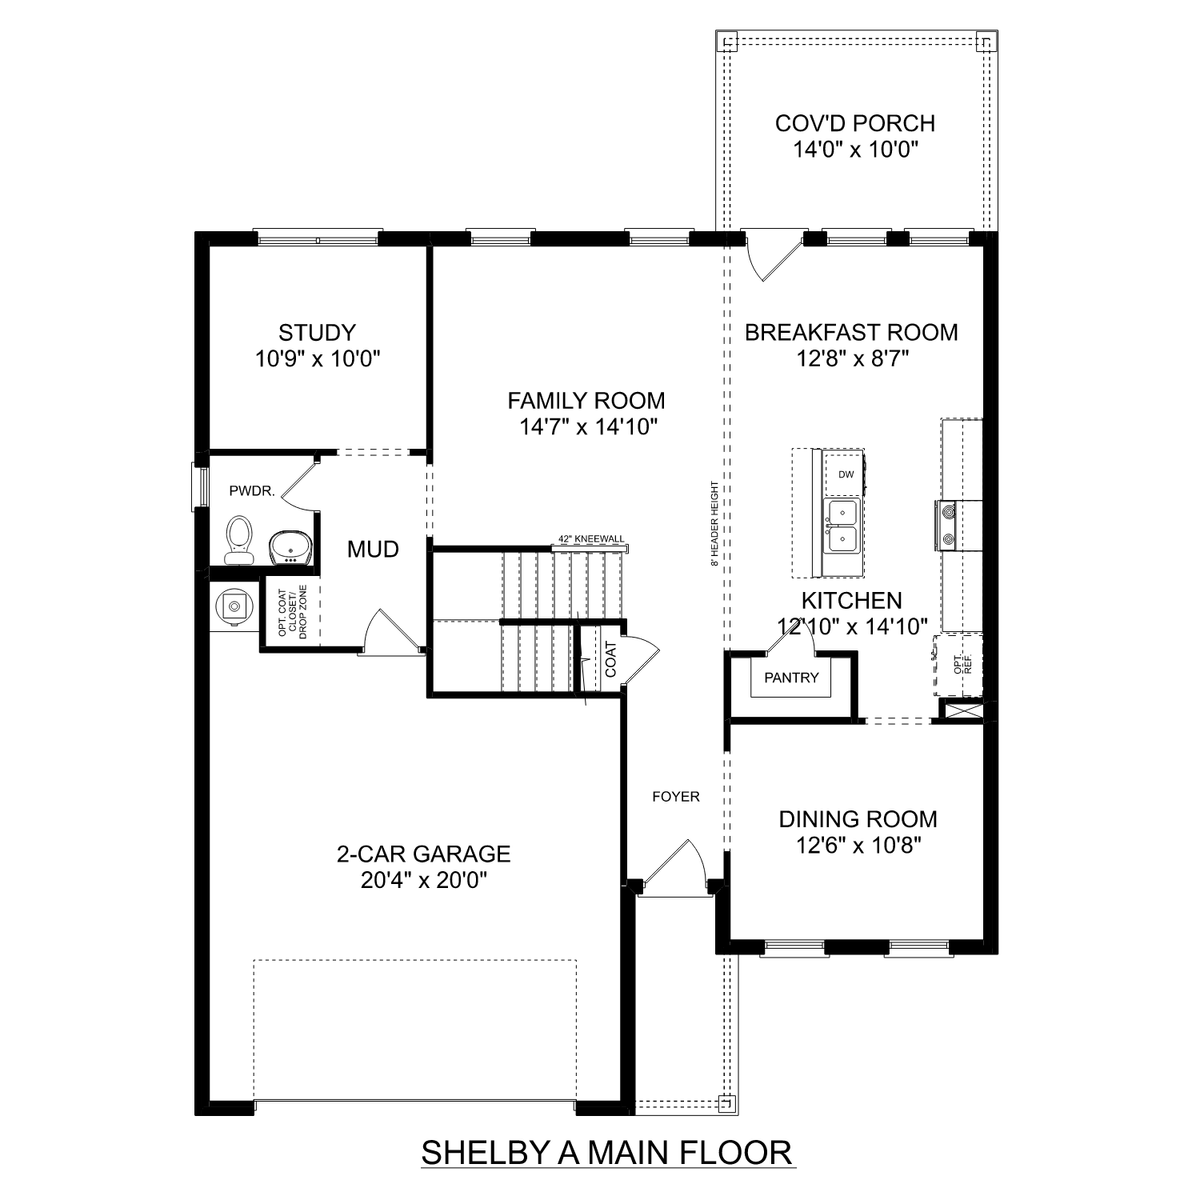 1 - The Shelby A buildable floor plan layout in Davidson Homes' Ricketts Farm community.